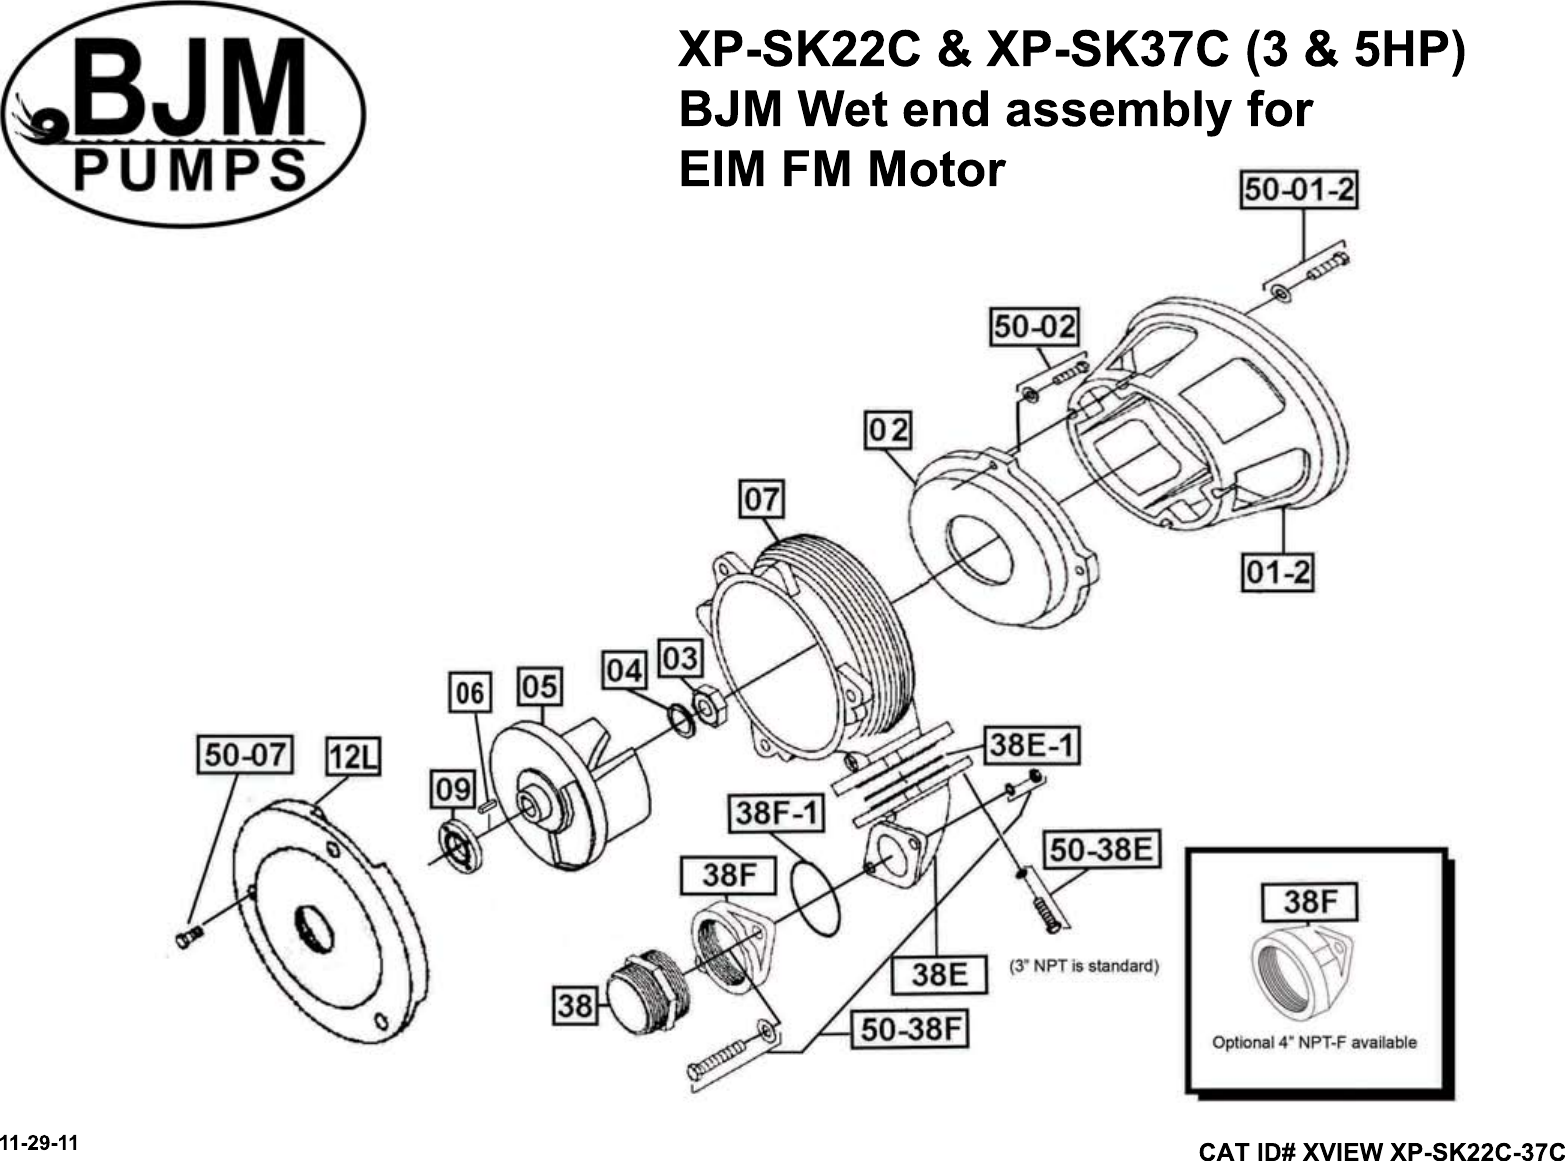 Page 2 of 4 - 136506 6 Bjm Xp-Sk Series Exploded View SK-XView-SK08C-SK15C 04-29-04.bmp User Manual